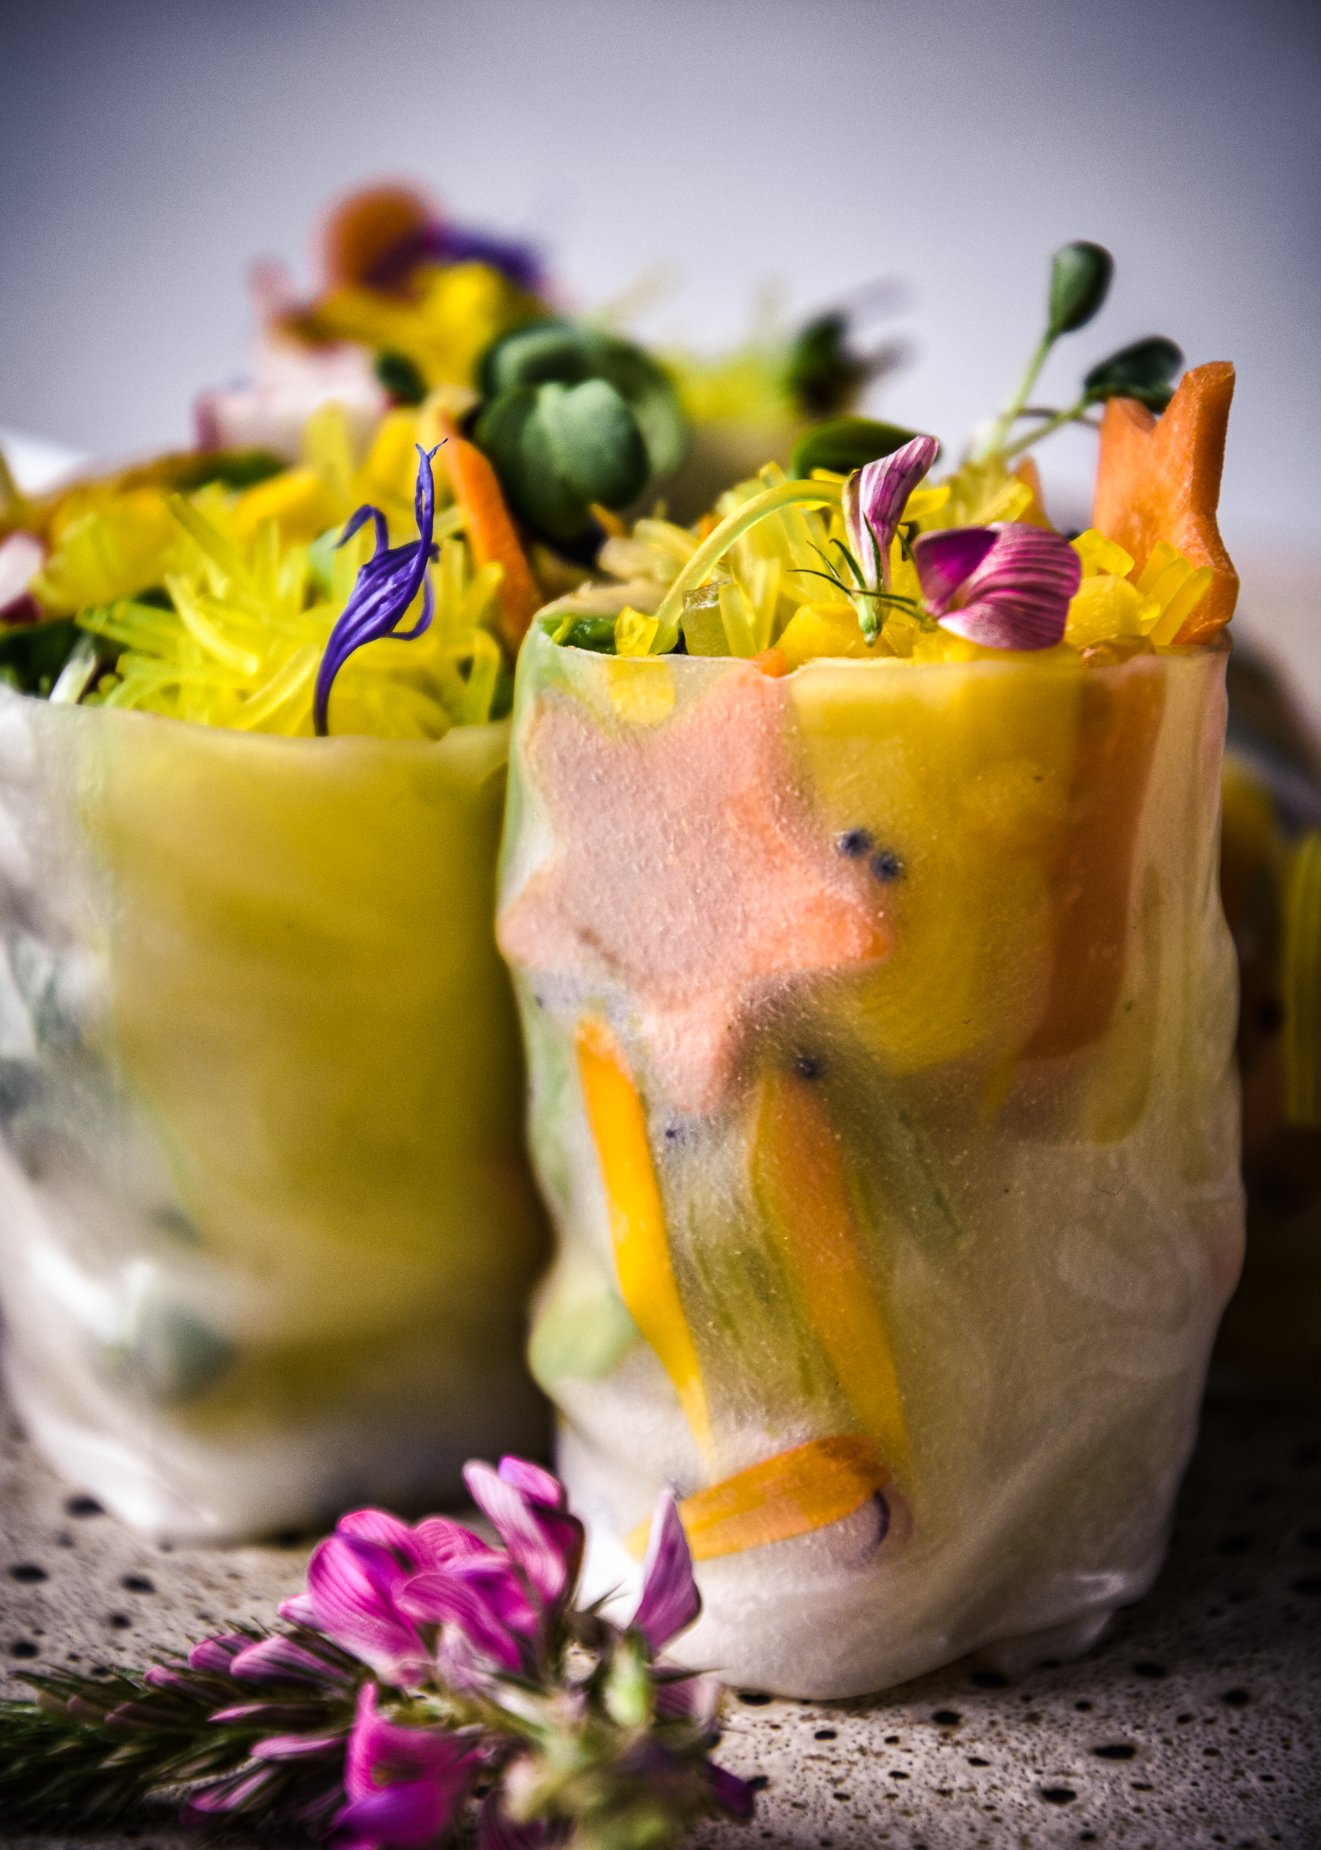 You are currently viewing Colorful Summerrolls with Calendula & Curcuma